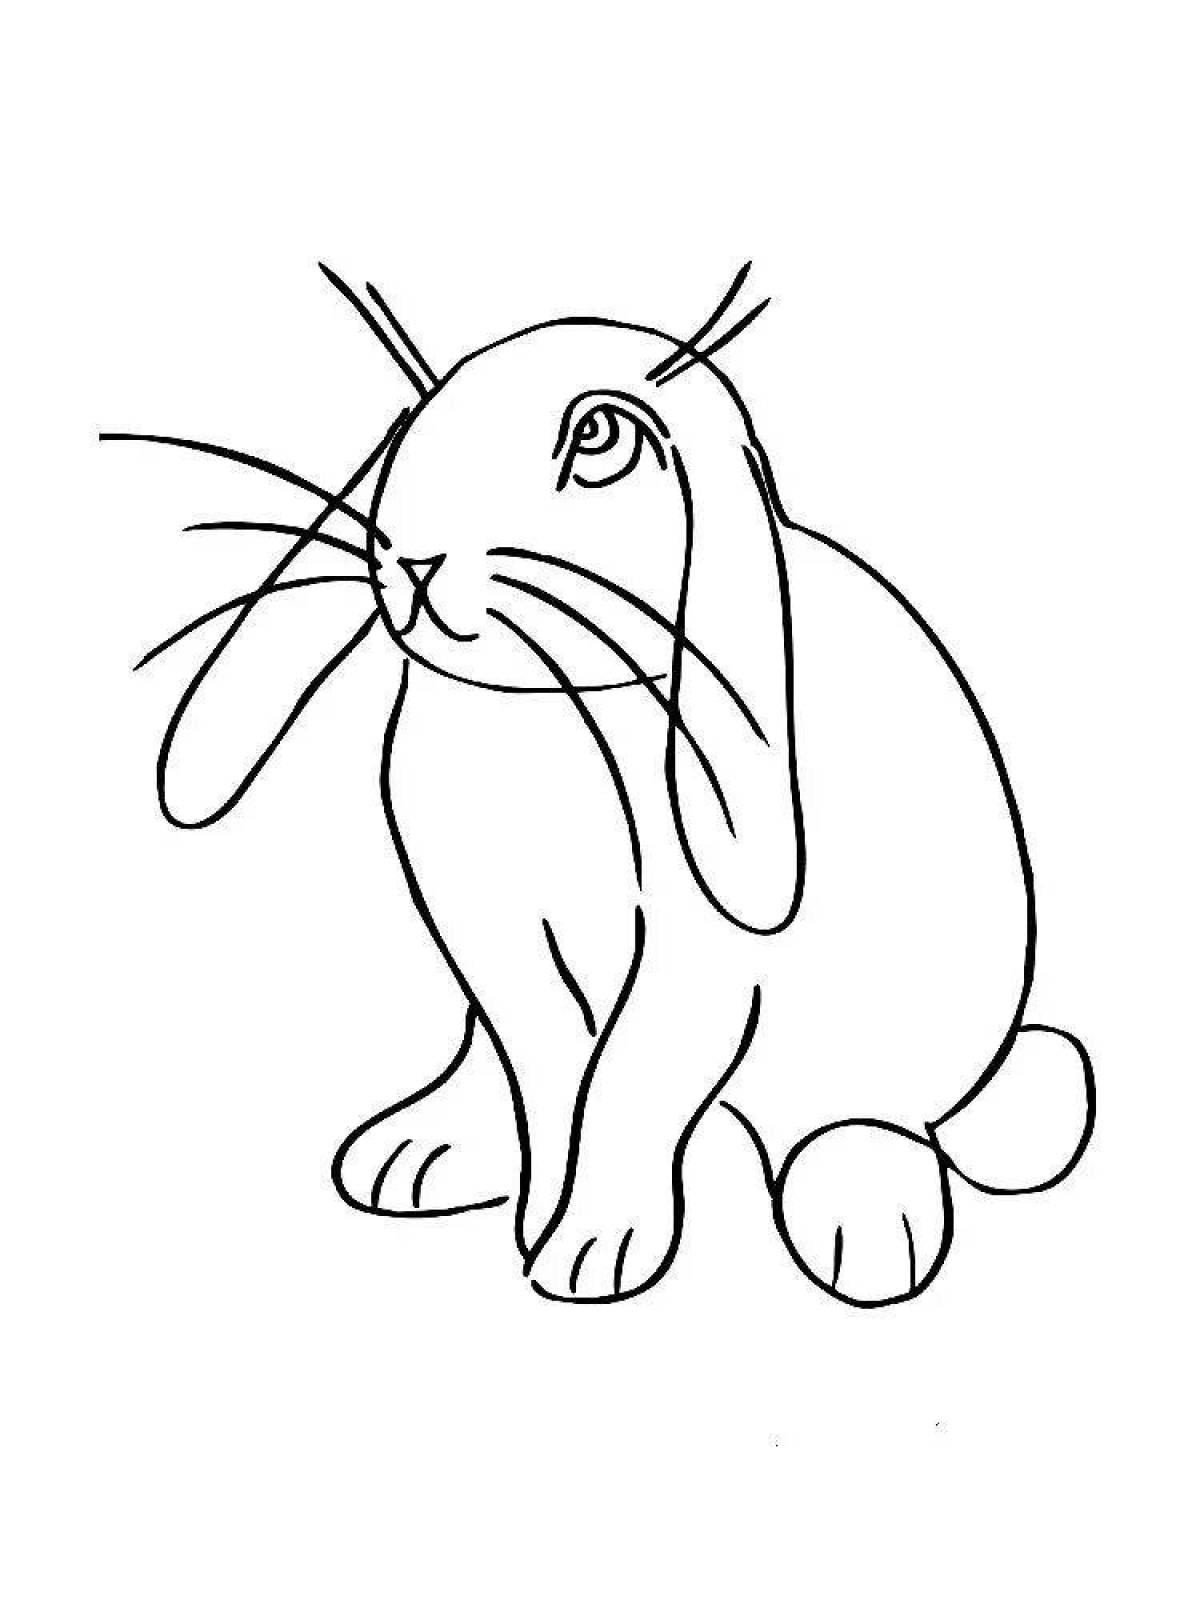 Cute cat and rabbit coloring page